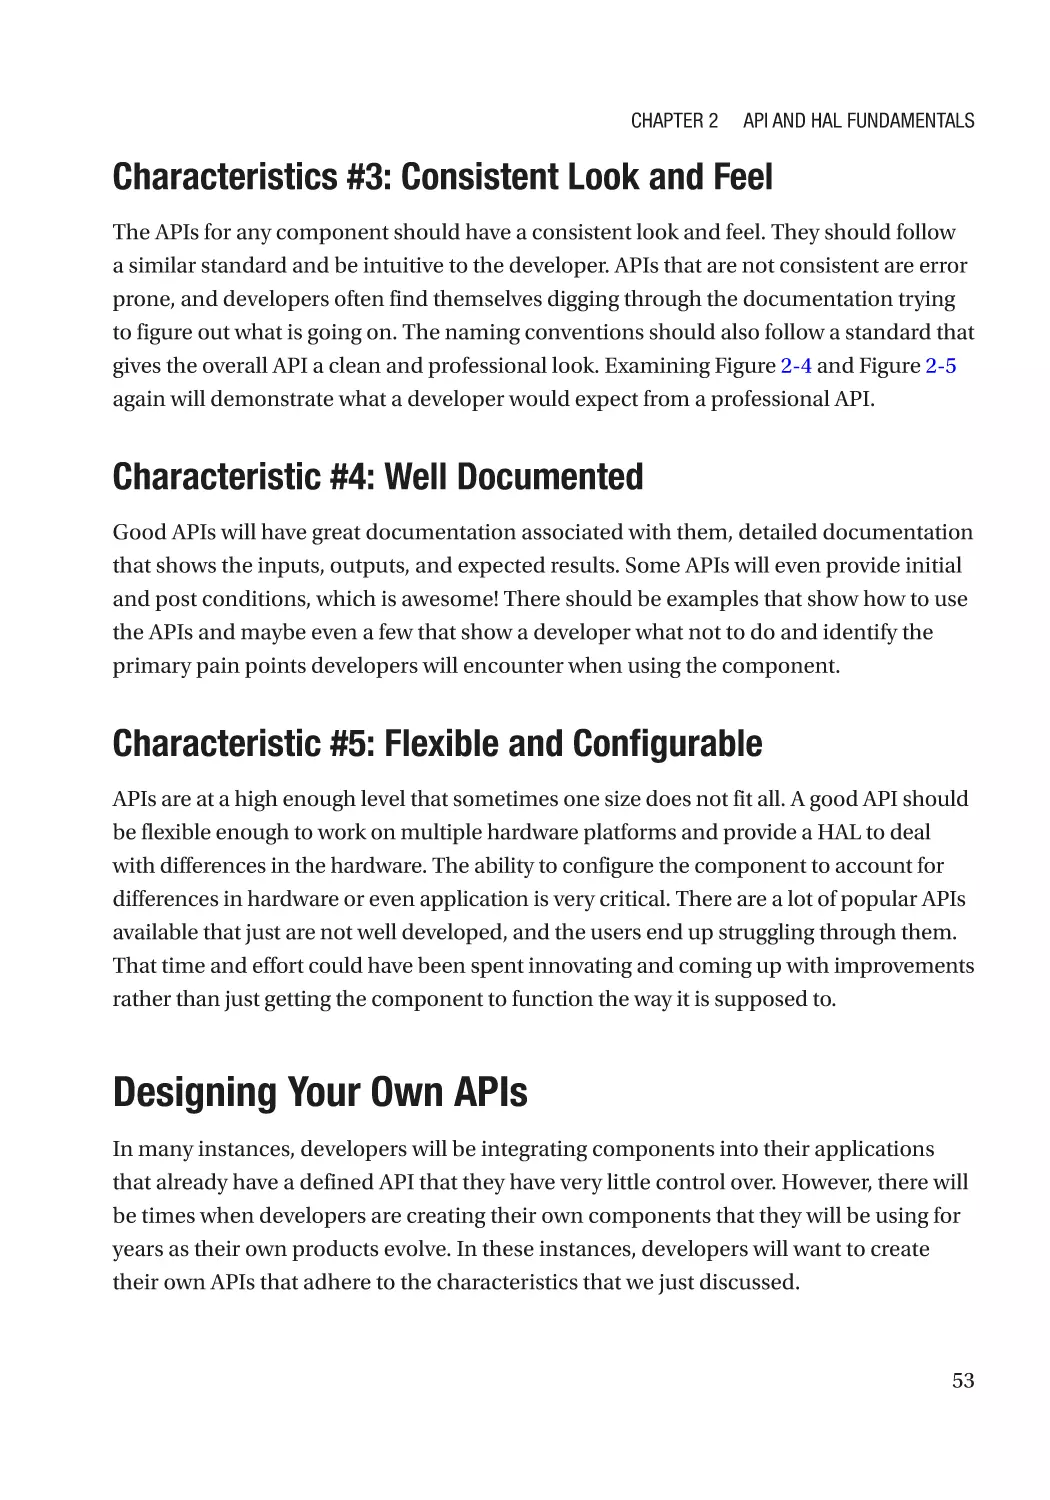 Characteristics #3
Characteristic #4
Characteristic #5
Designing Your Own APIs